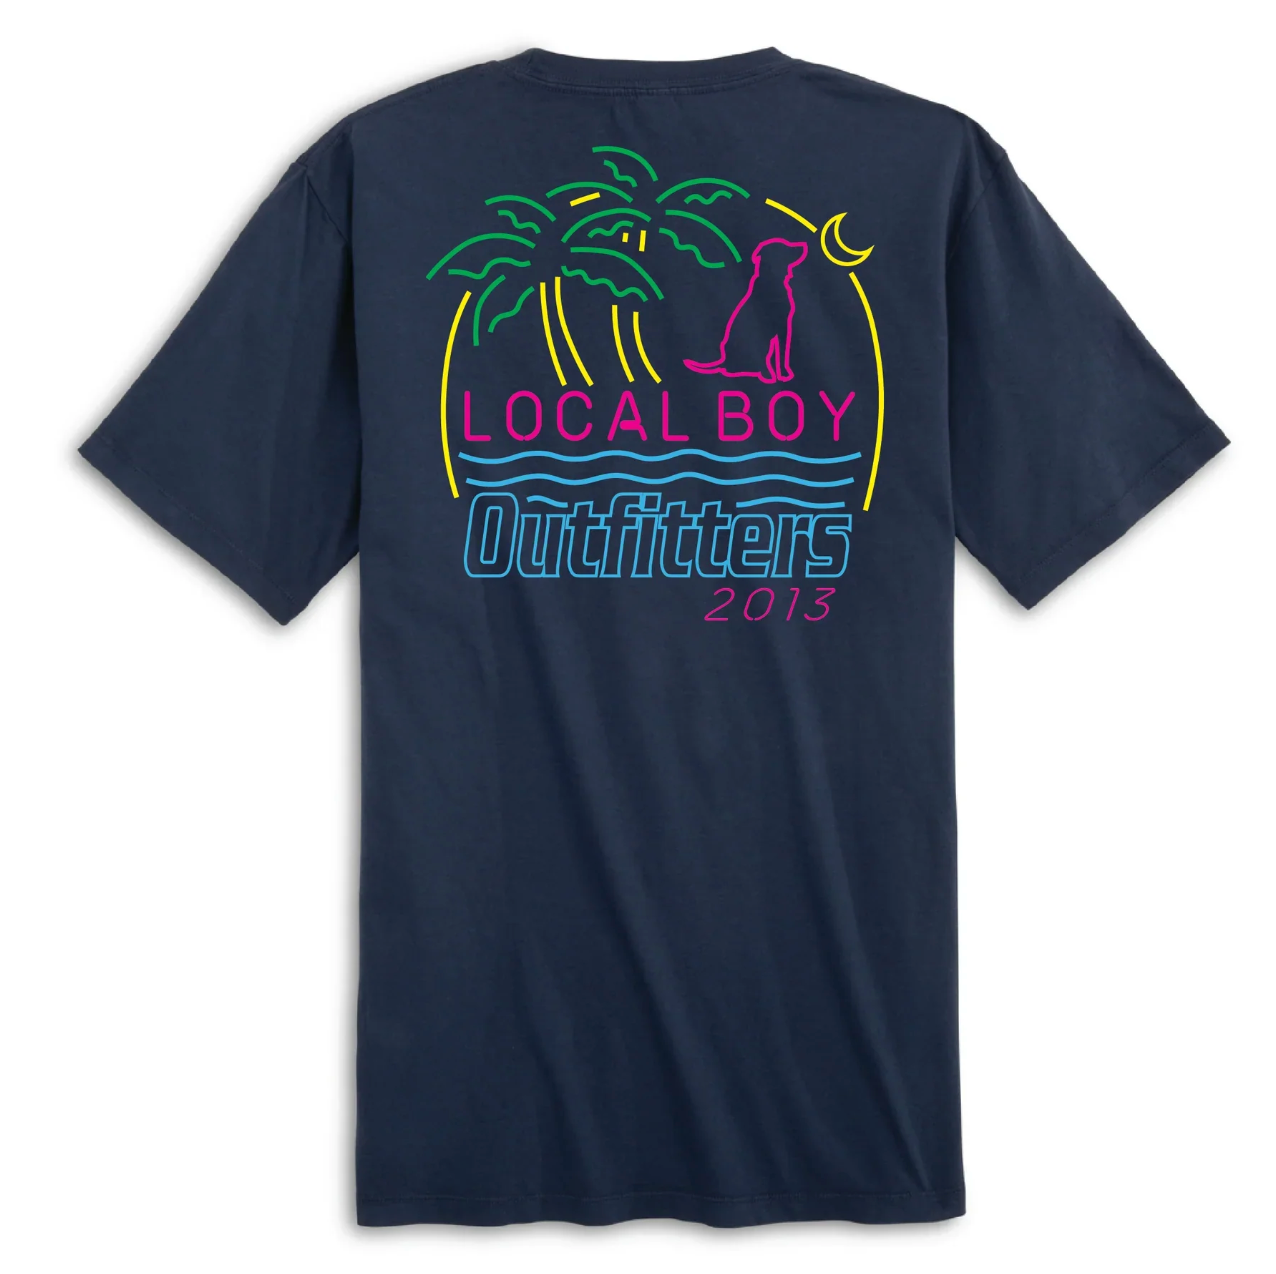 LOCAL BOY OUTFITTERS NATURDAYS**